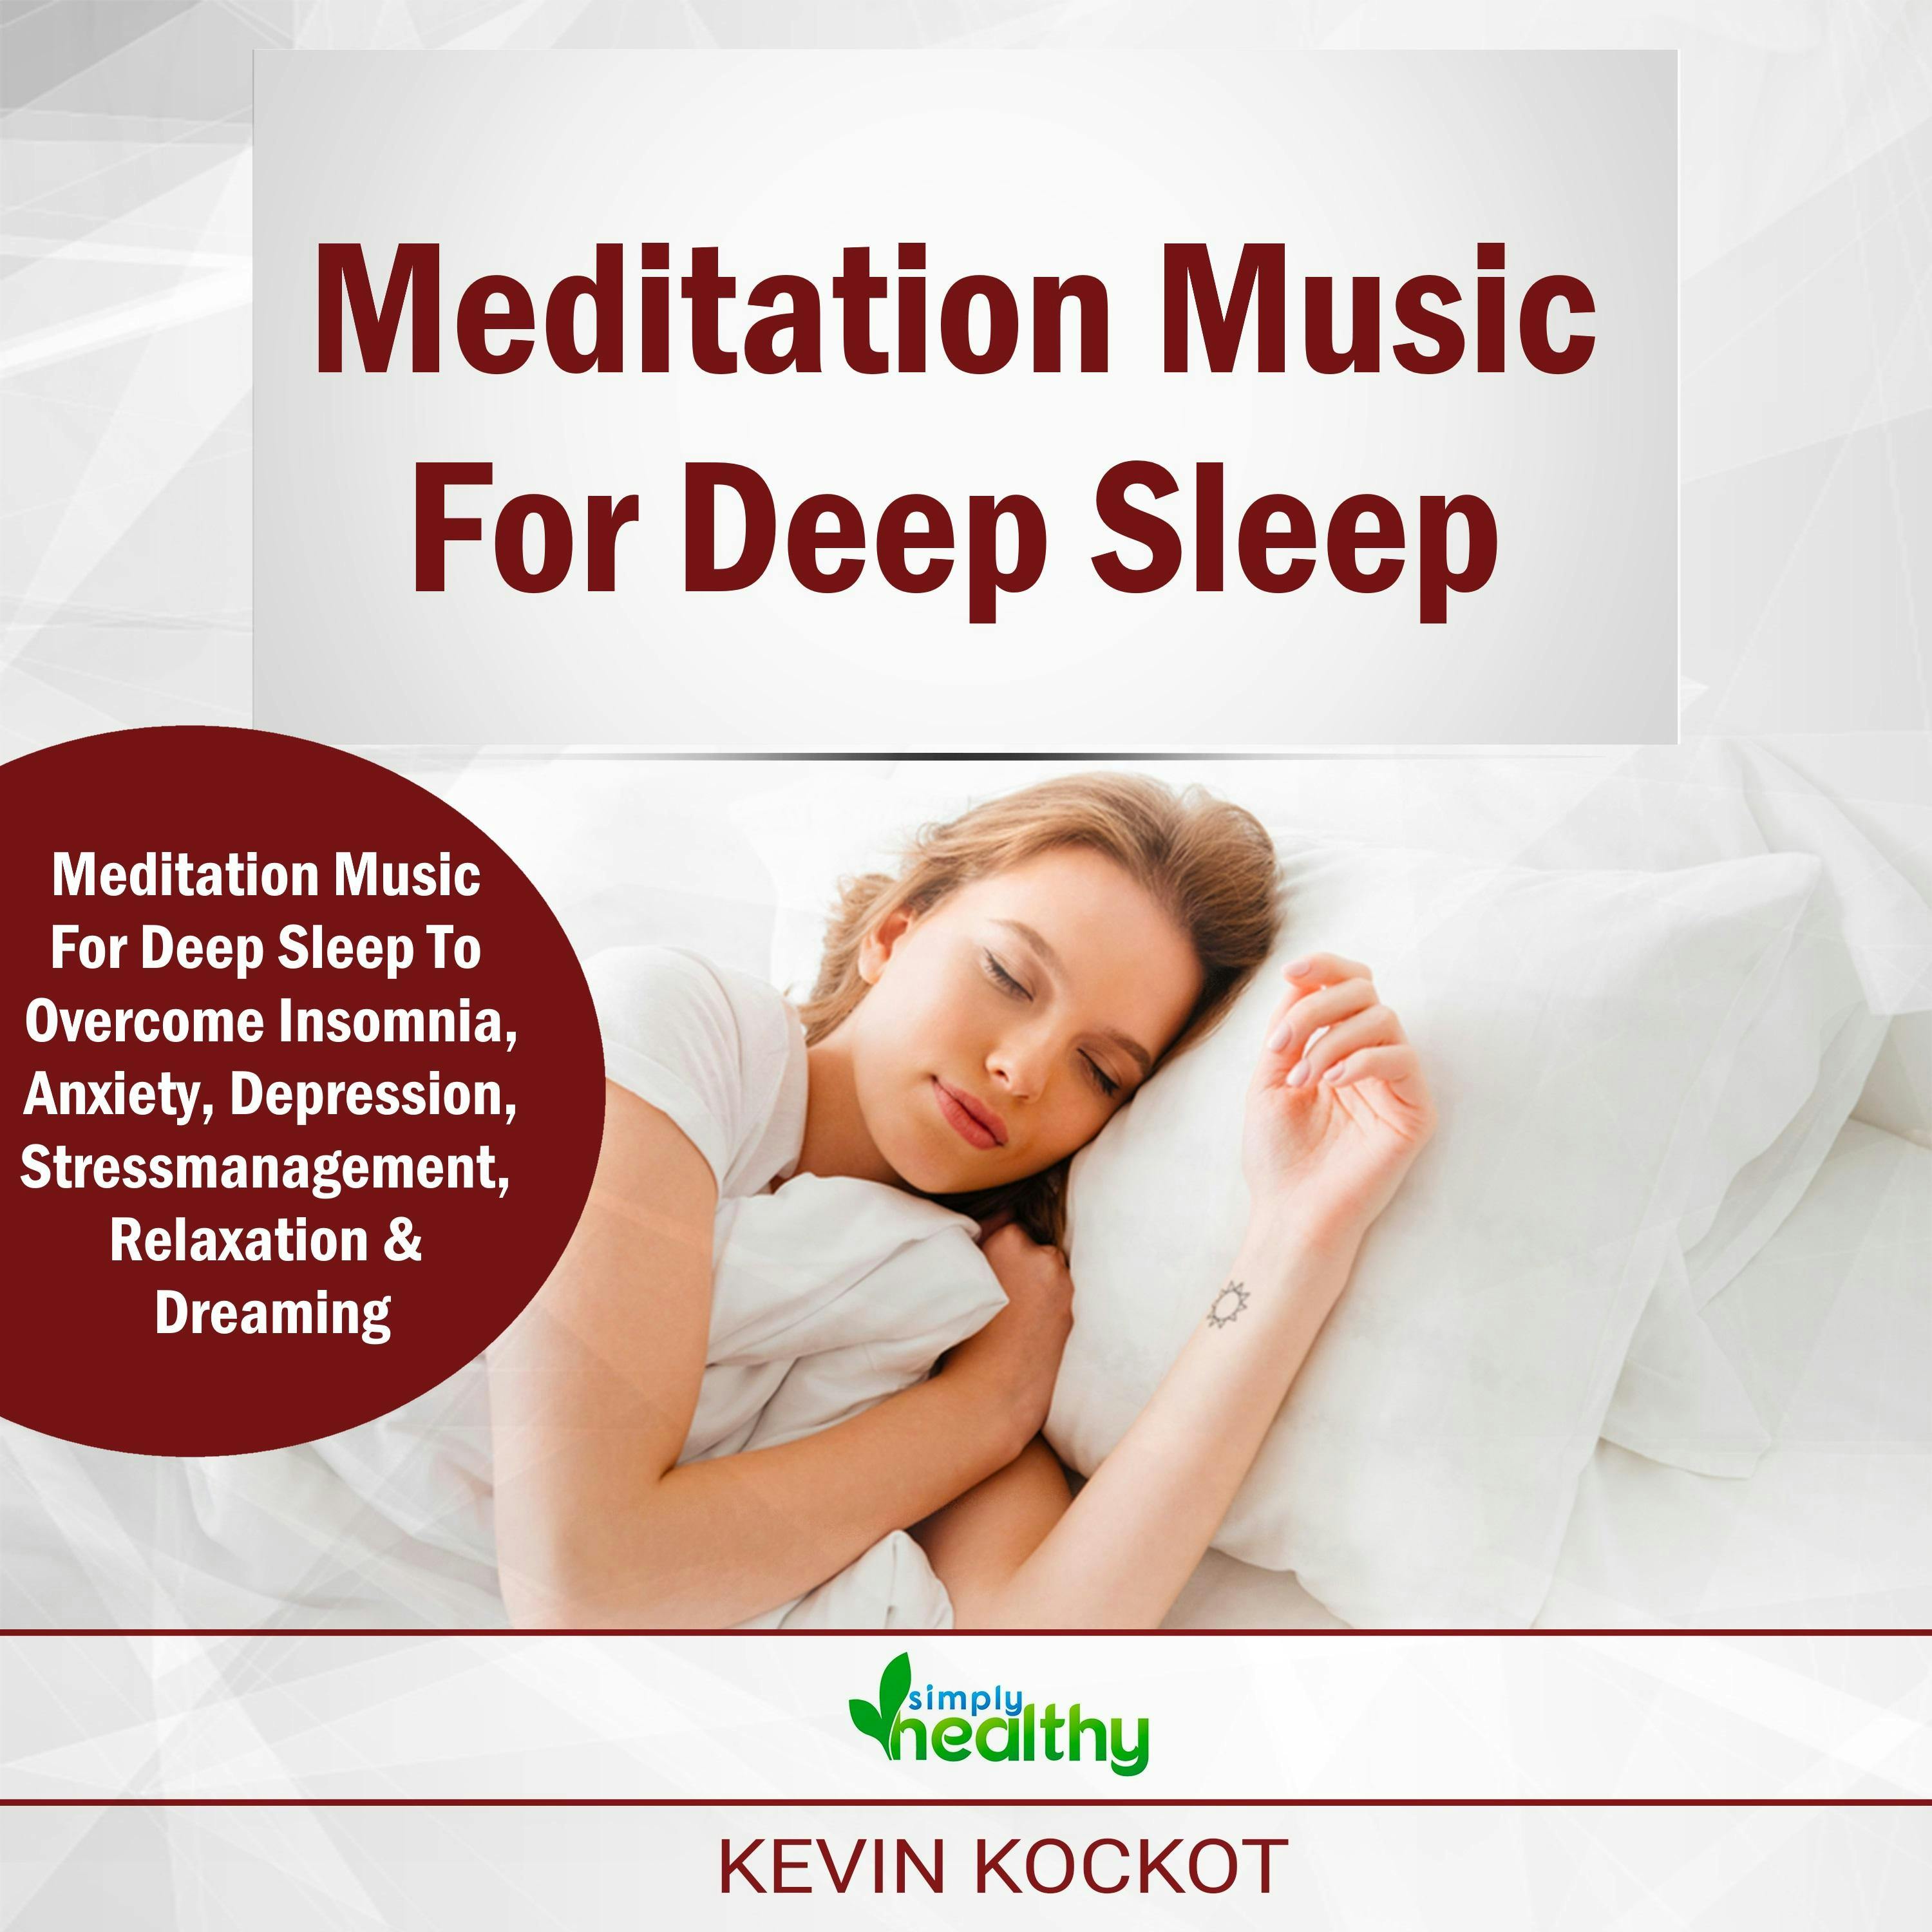 Meditation Music For Deep Sleep: Meditation Music & Guided Meditations To Overcome Insomnia, Anxiety, Depression, Stress Management, Relaxation and Enjoy Deep Sleep - Simply healthy